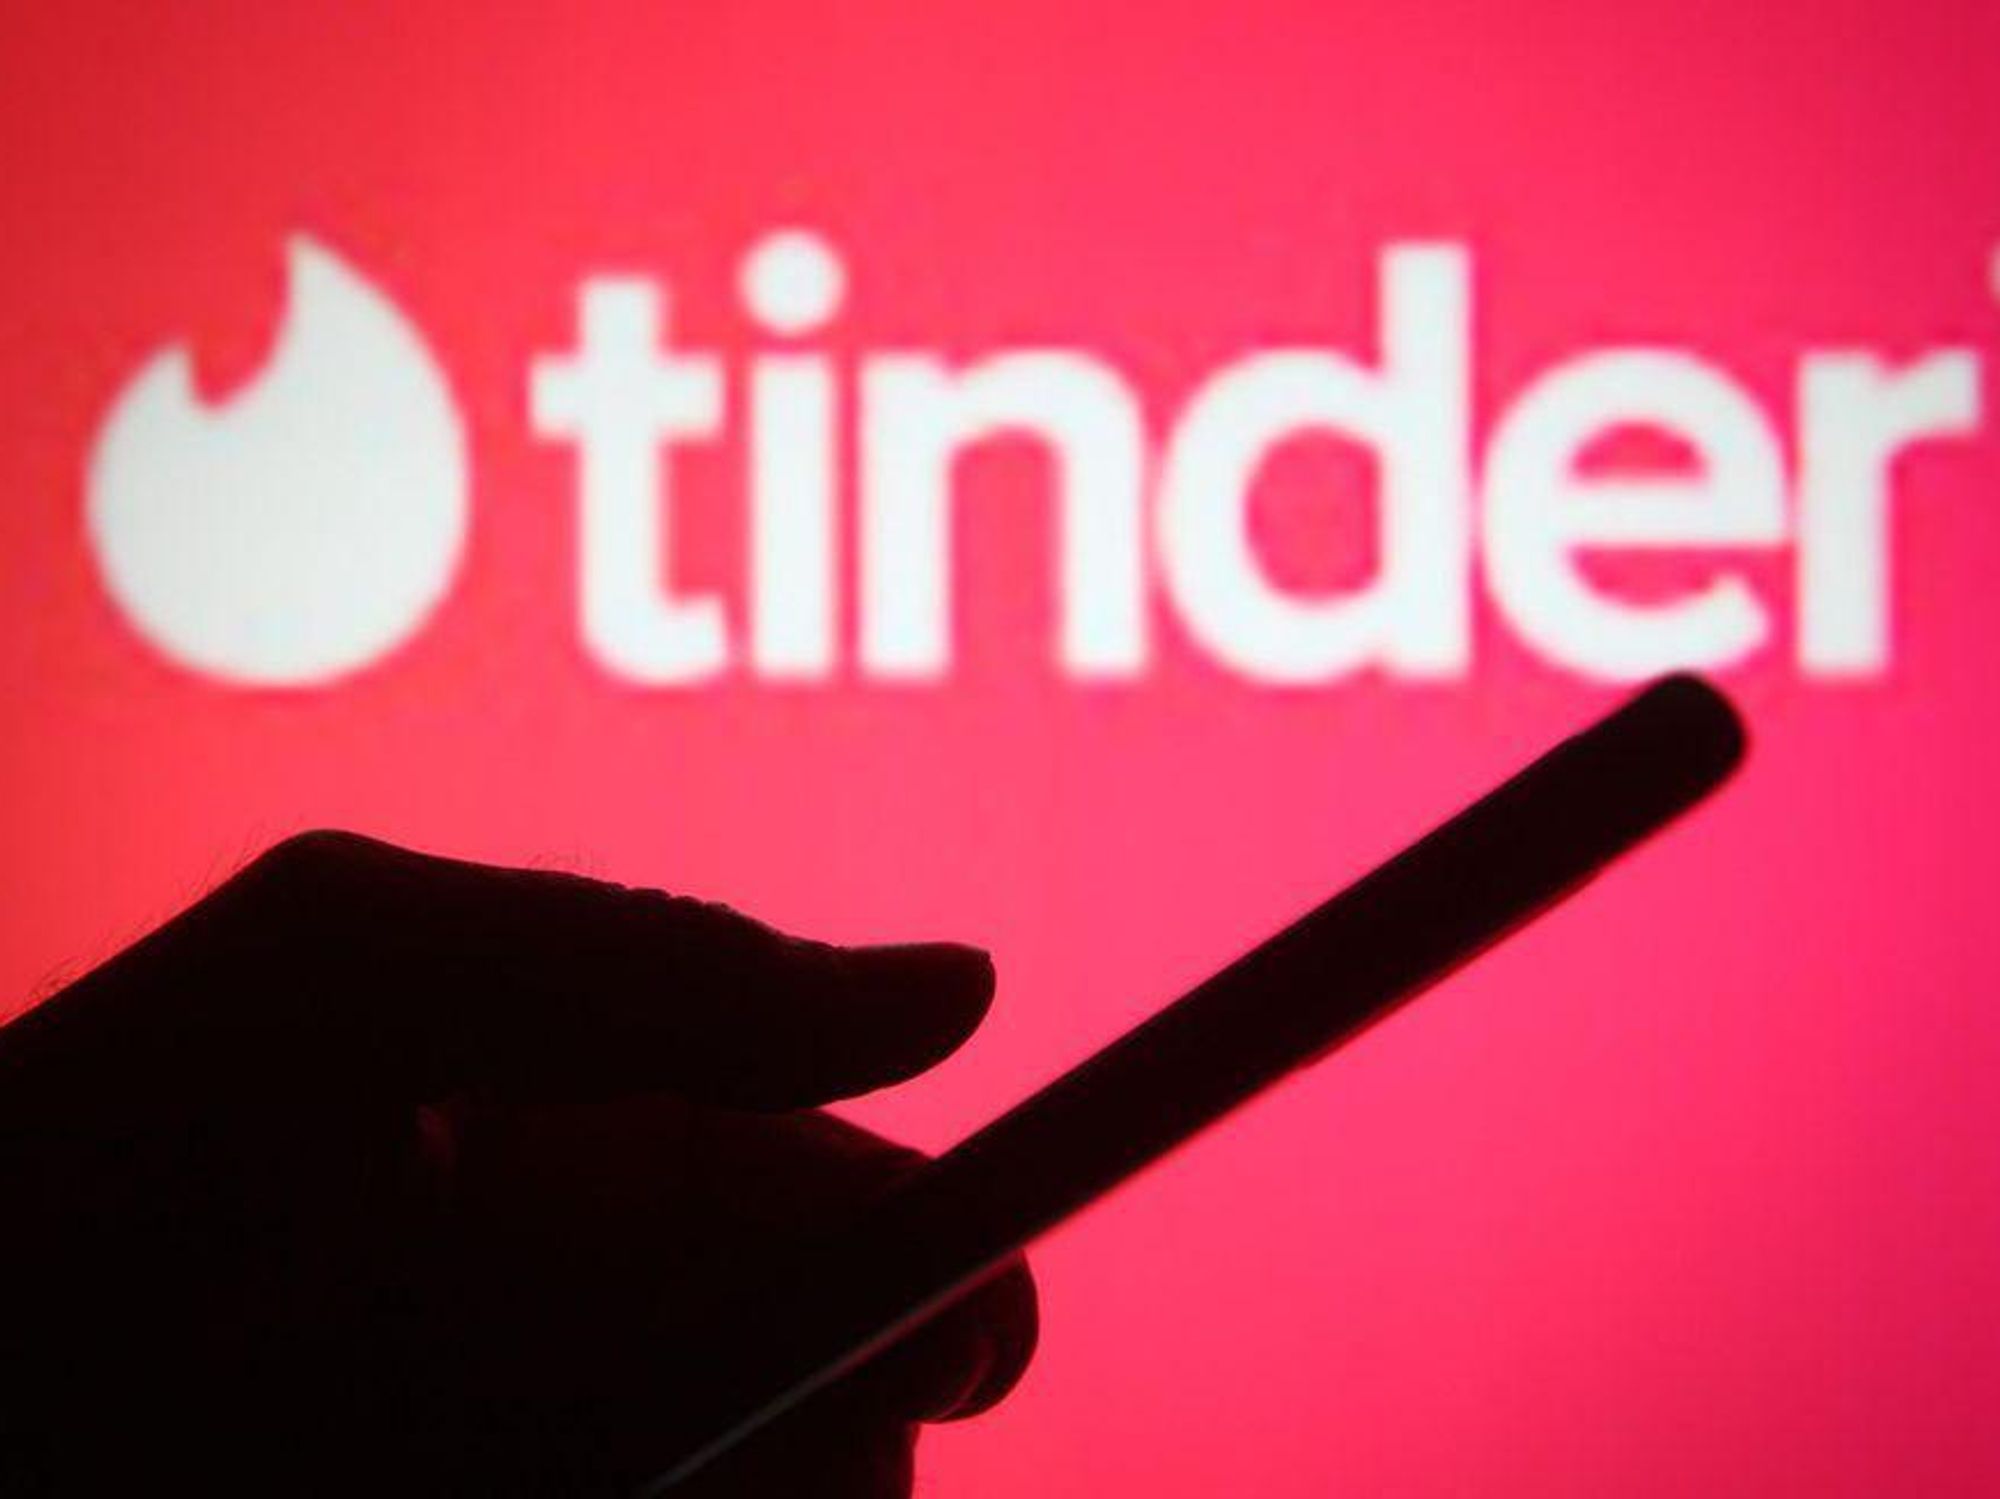 How the $2 Billion Case Over Tinder Is Playing Out, and What May Come Next